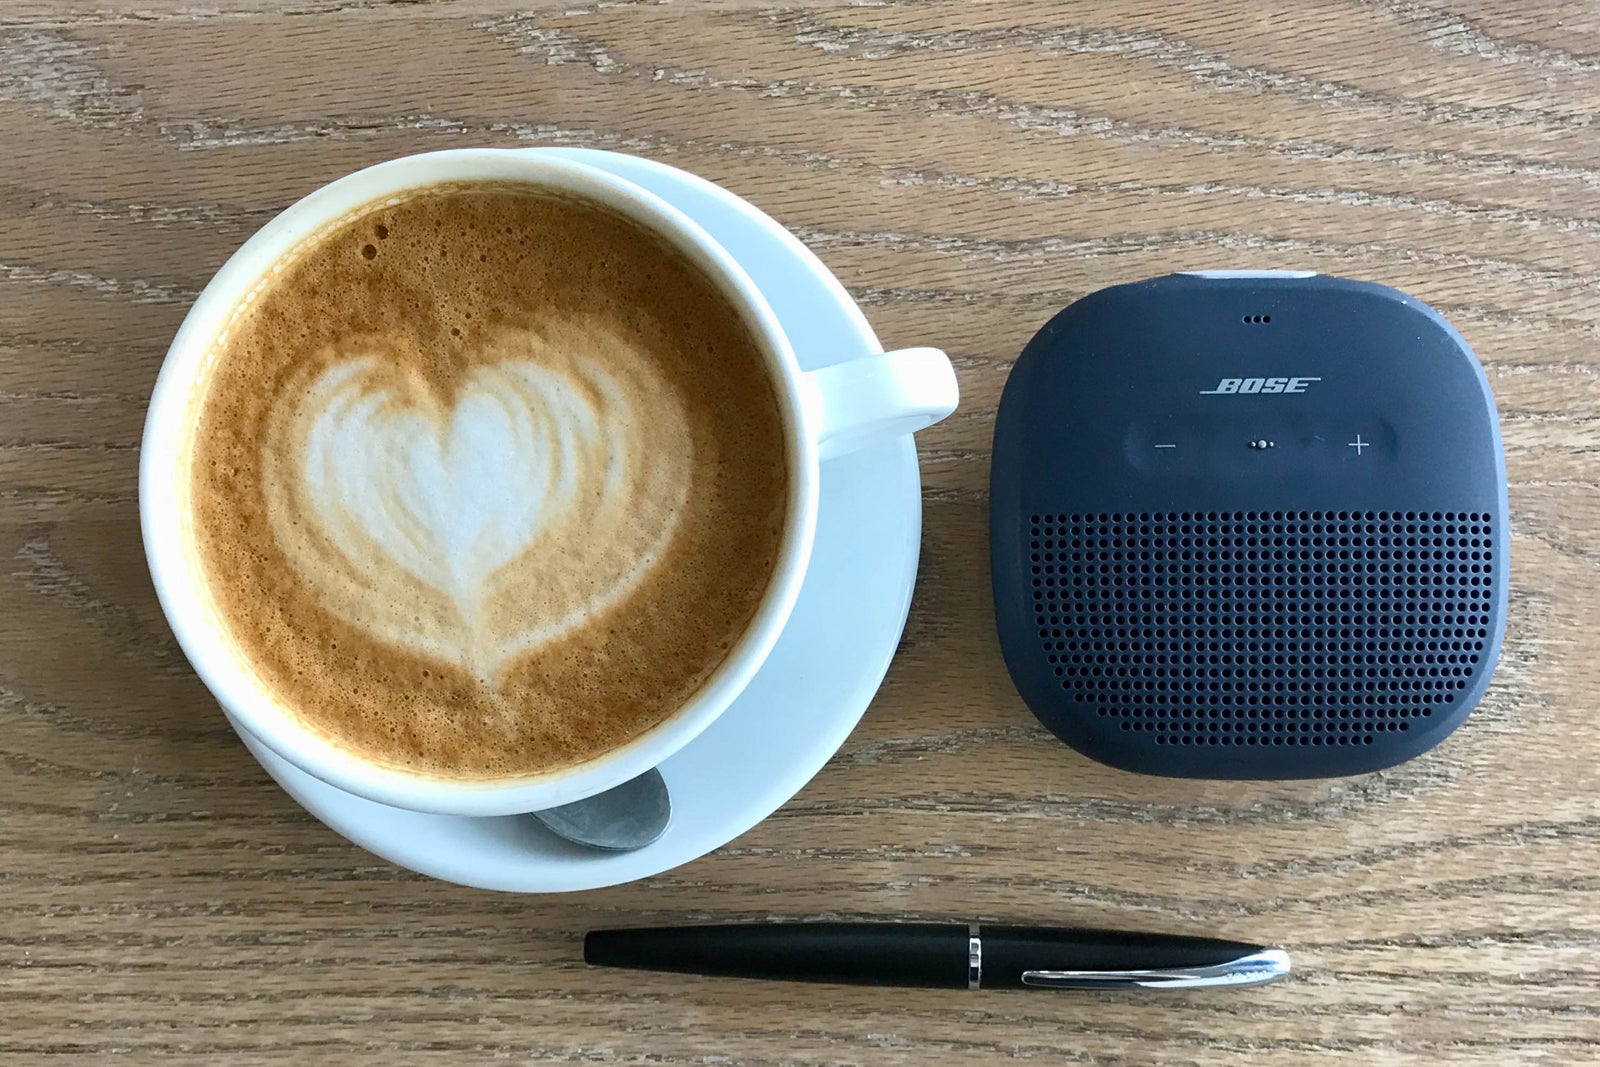 Bose Soundlink Micro review: This very tiny Bluetooth speaker delivers great big sound